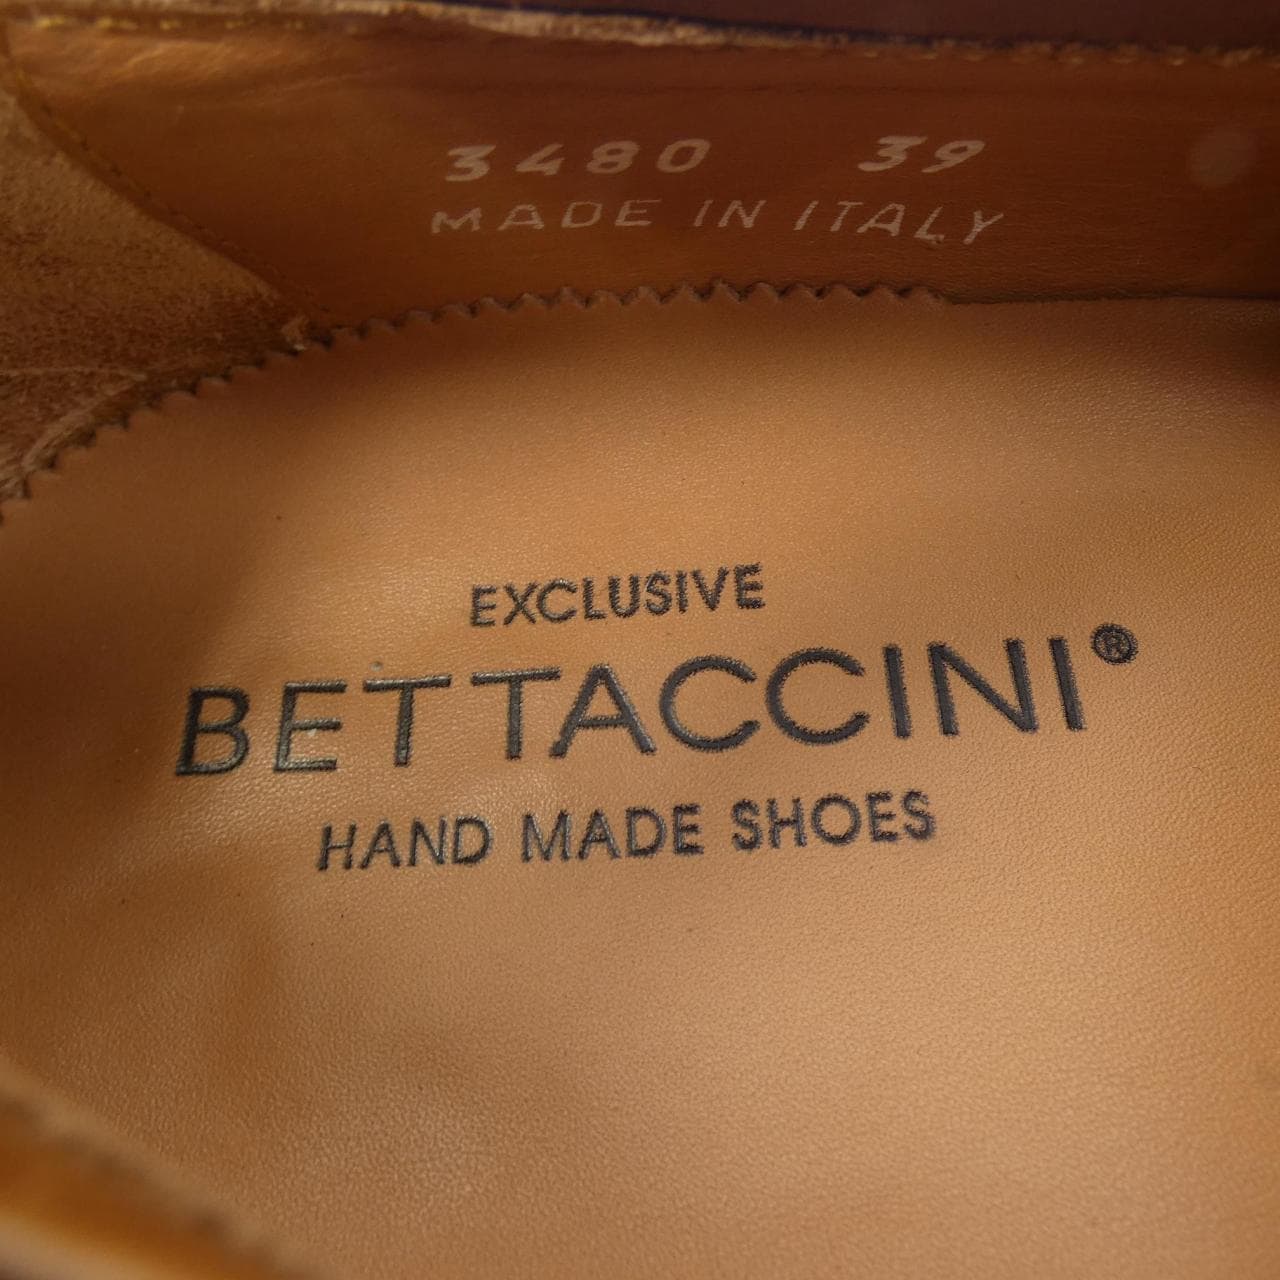 BETTACCINI shoes